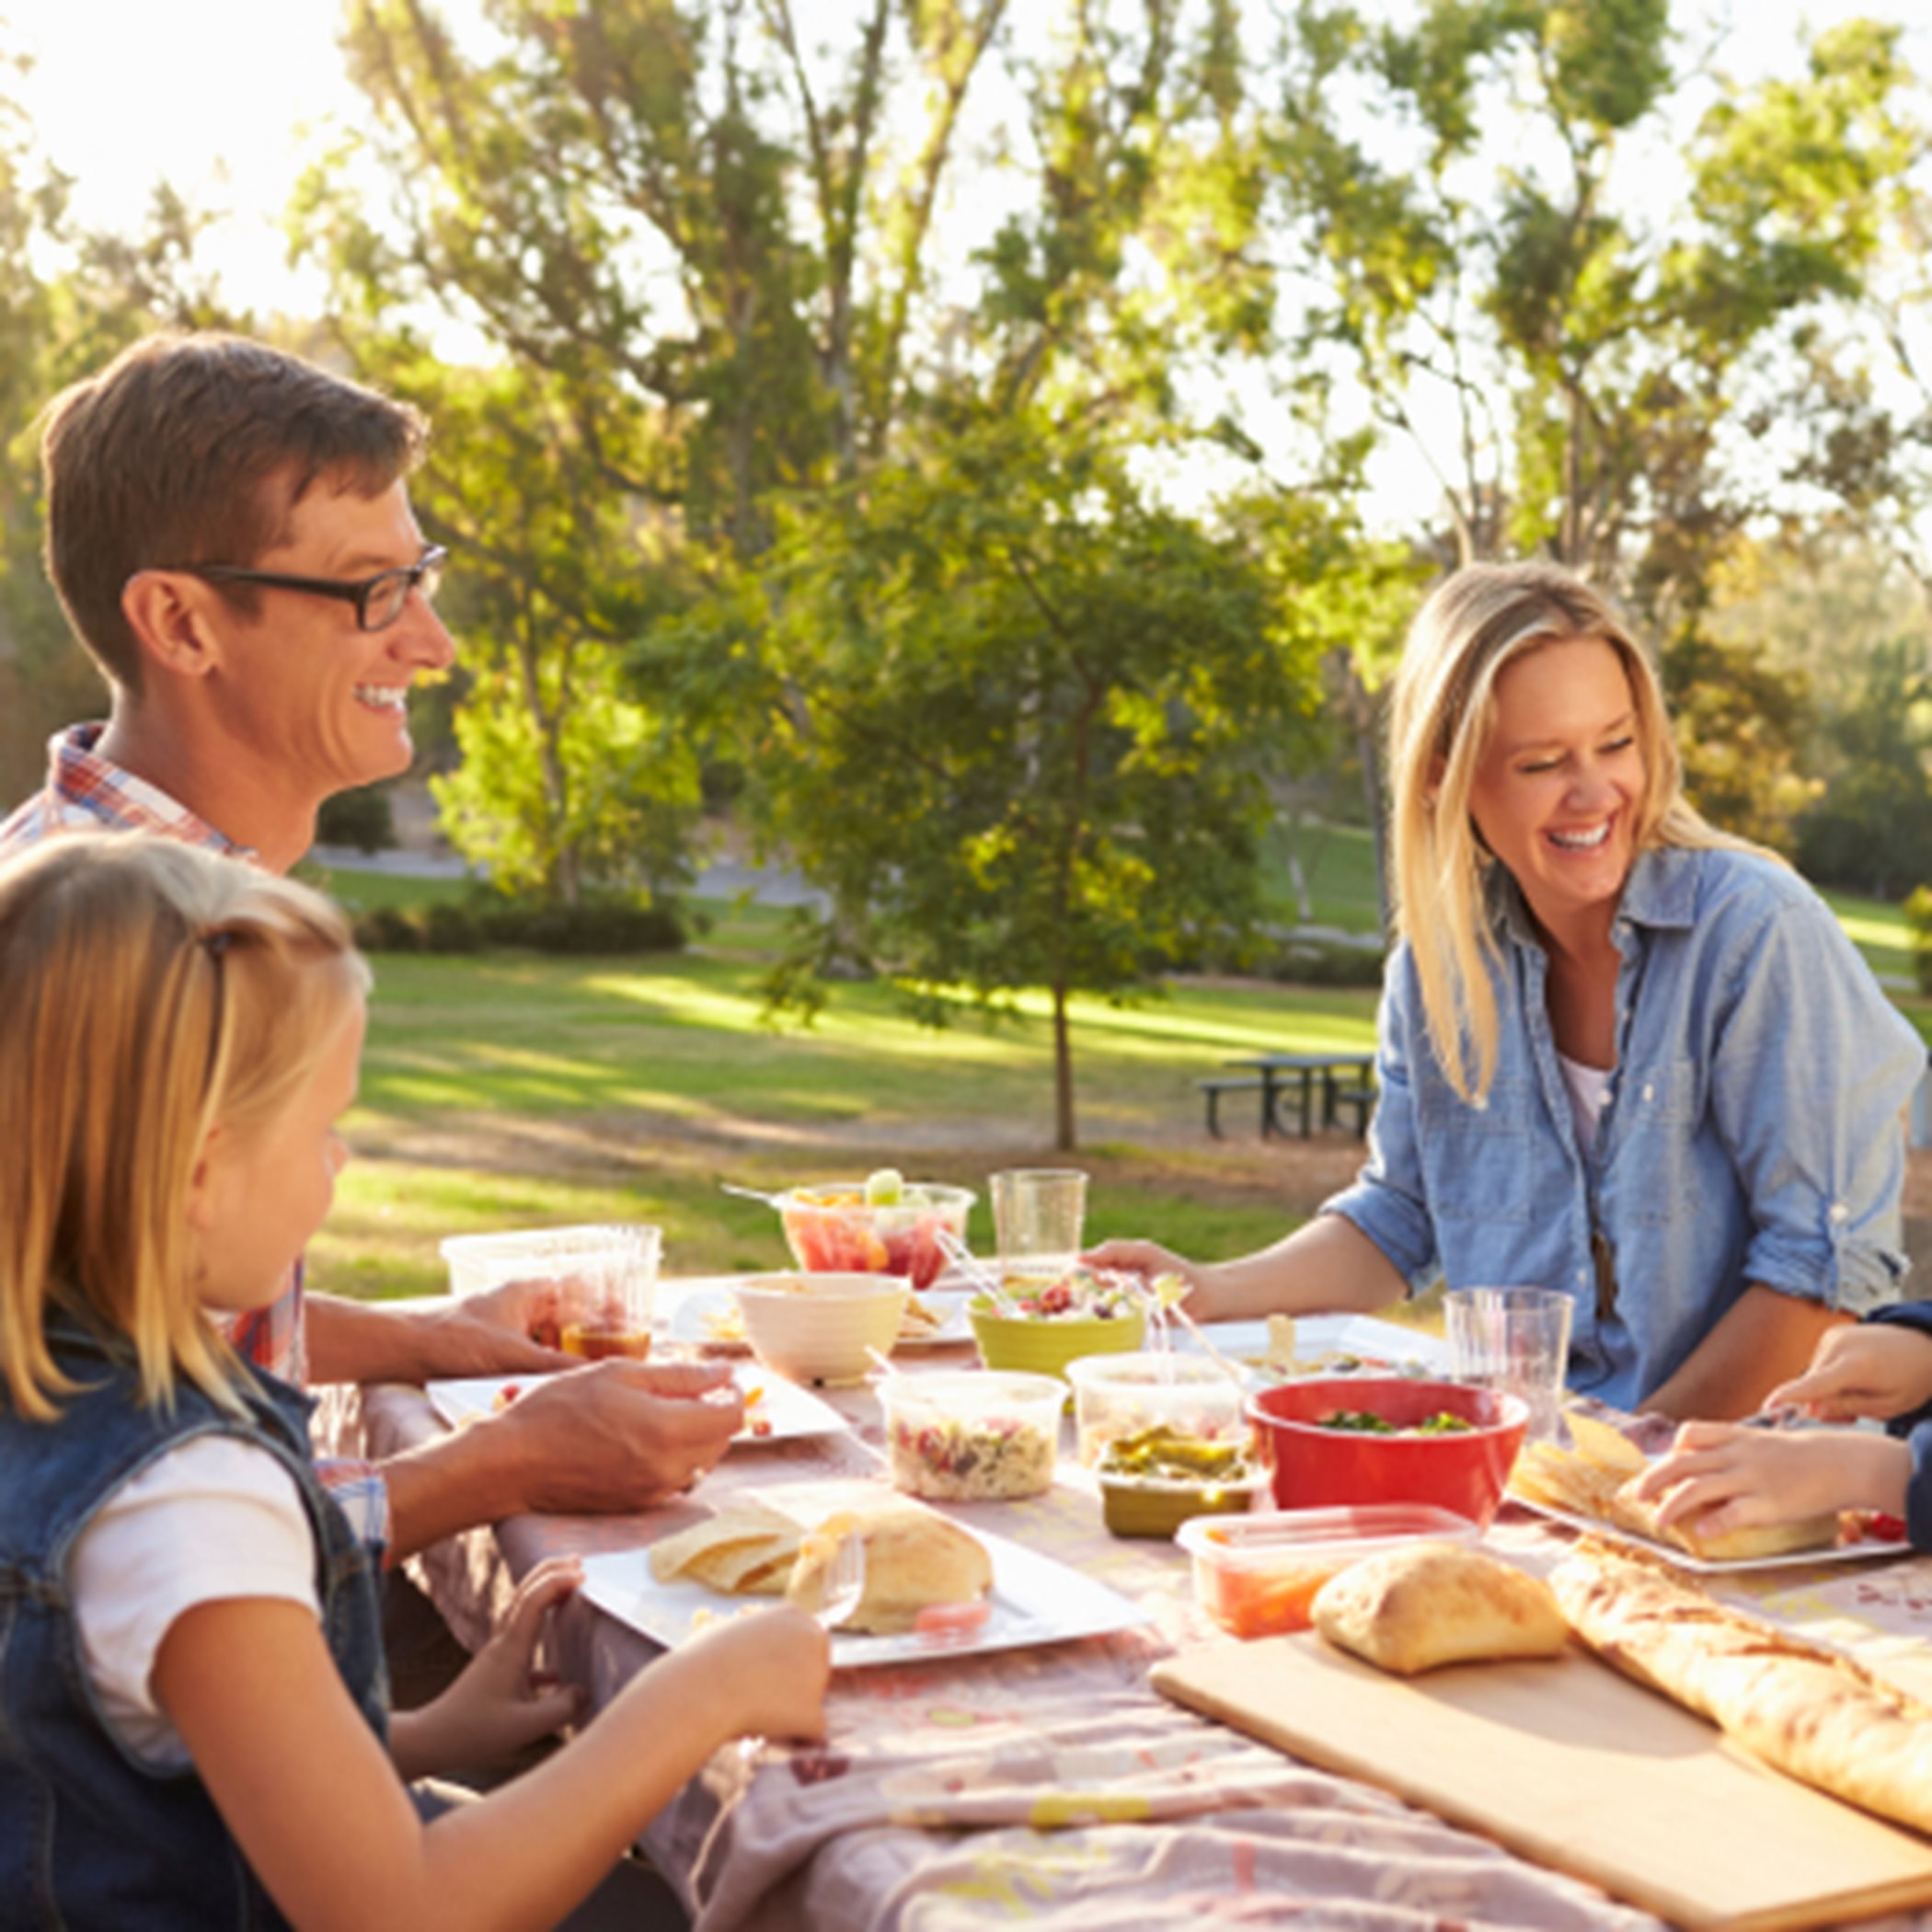 Family enjoying a picnic in community together